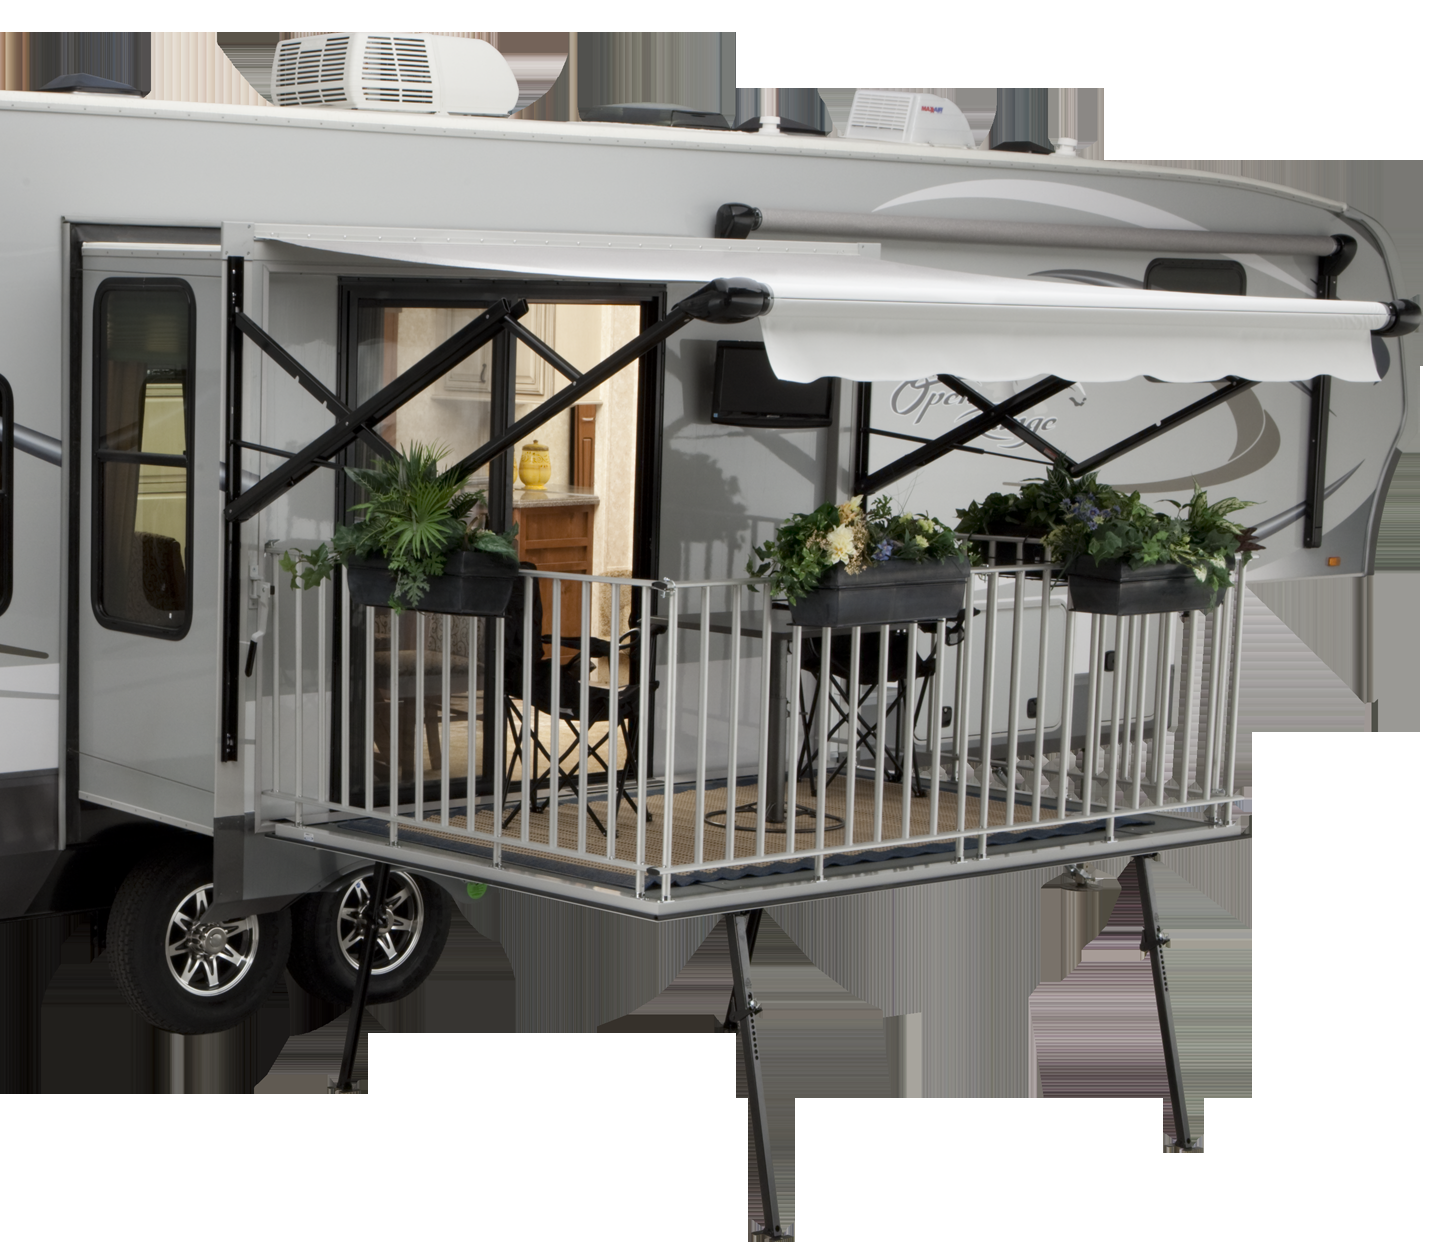 wow, Open Range RV Company; The Patio and Patio Awning is available only on the